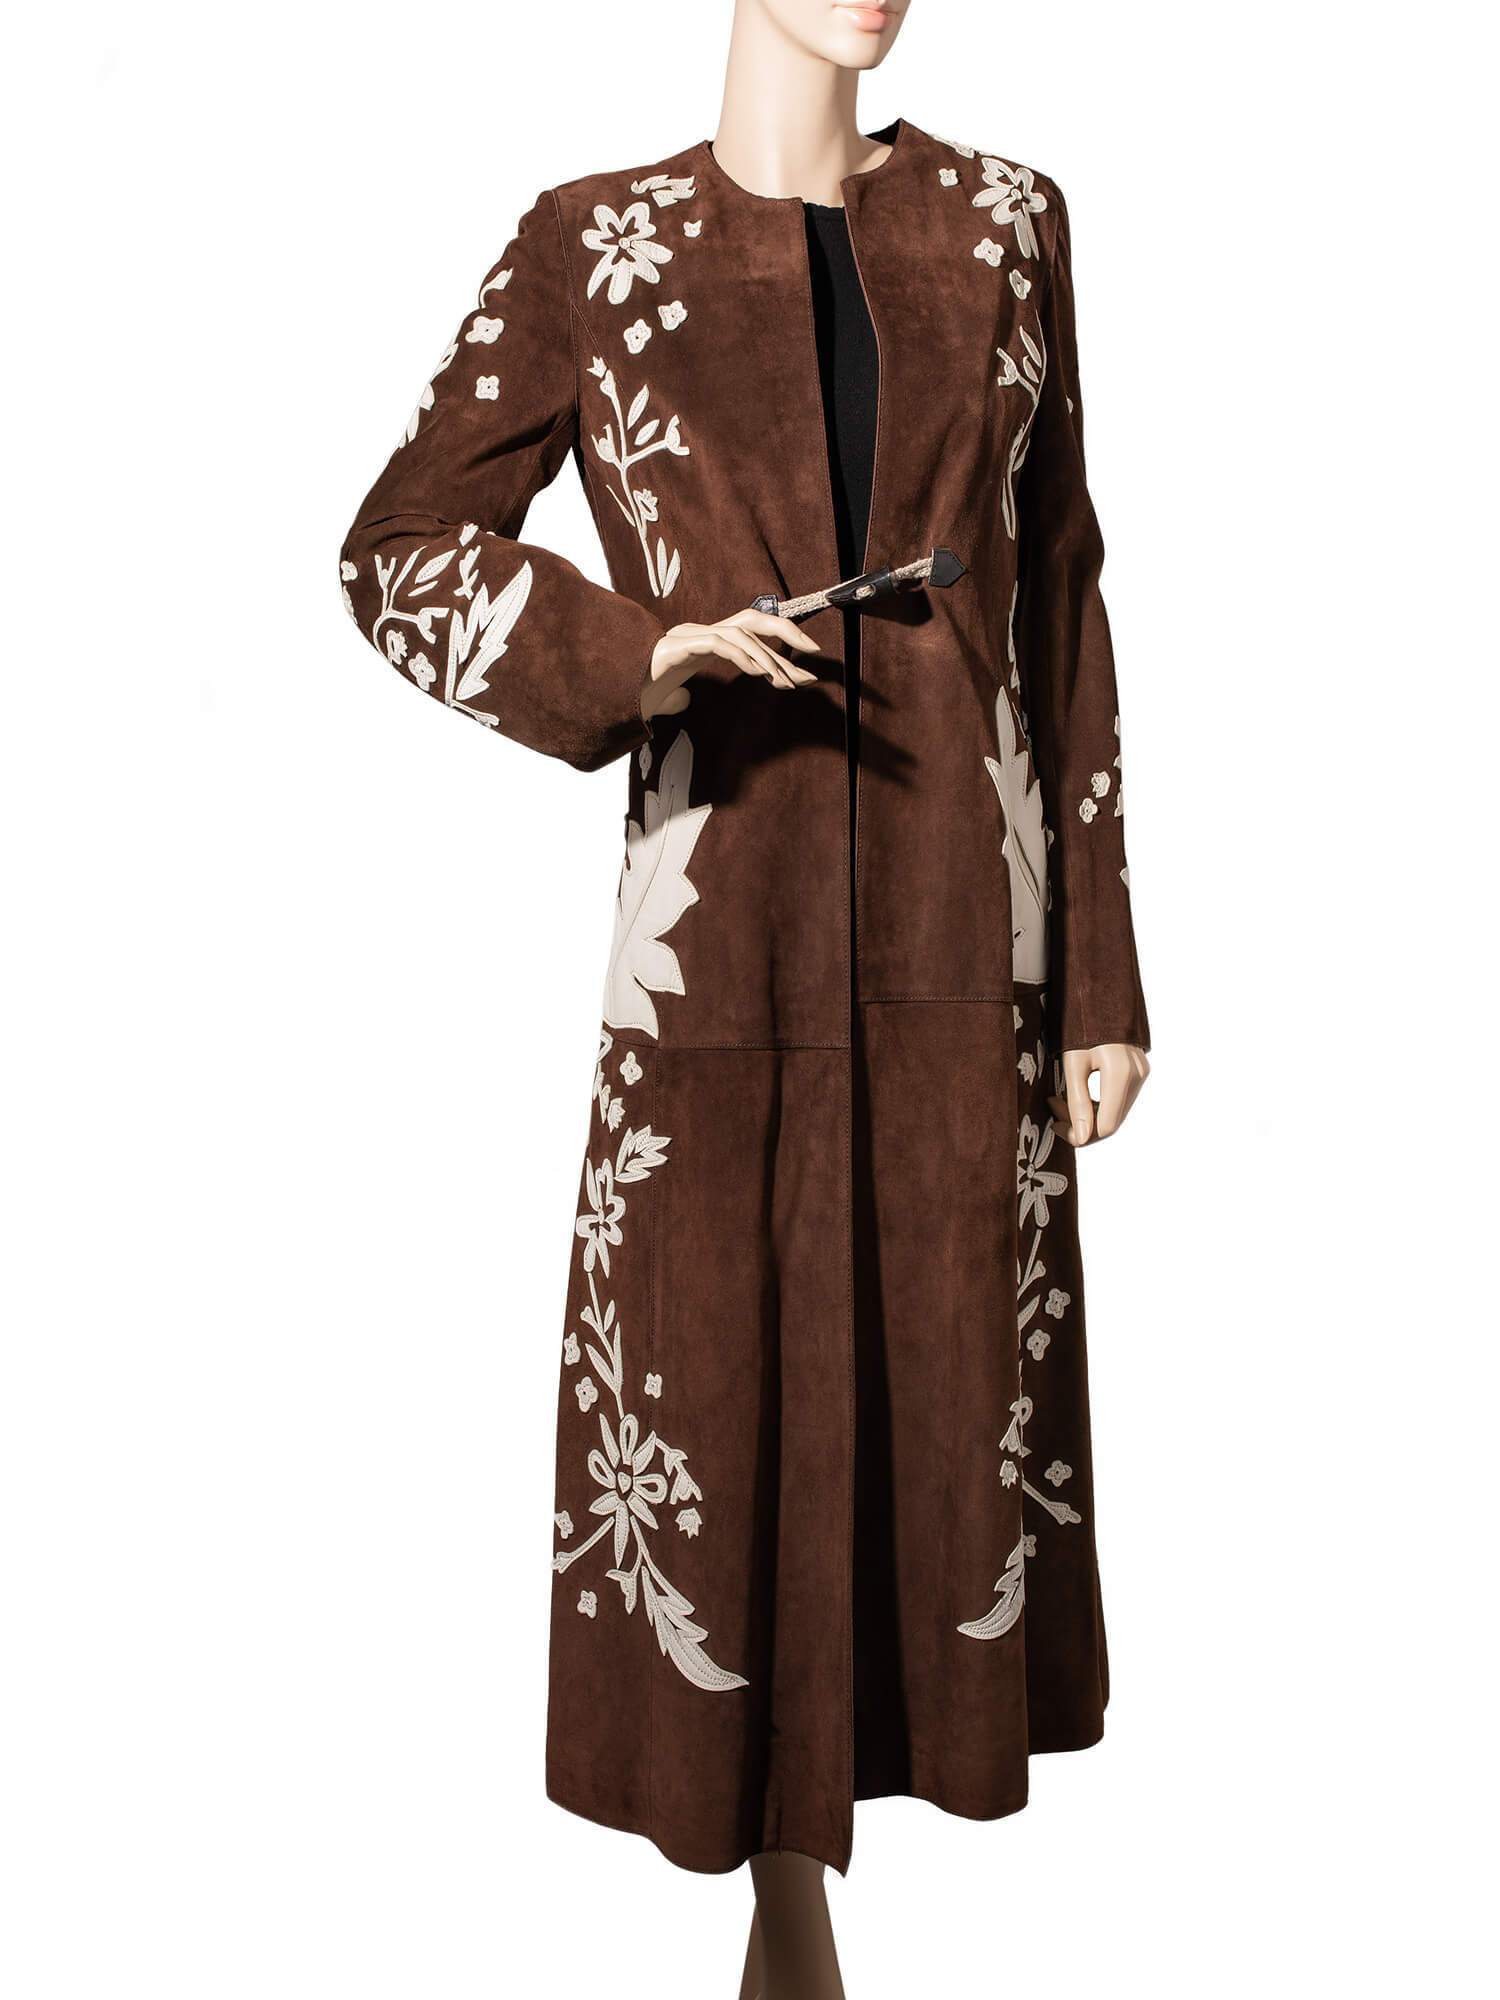 Dolce & Gabbana Couture Suede Leather Embroidered Coat Brown-designer resale